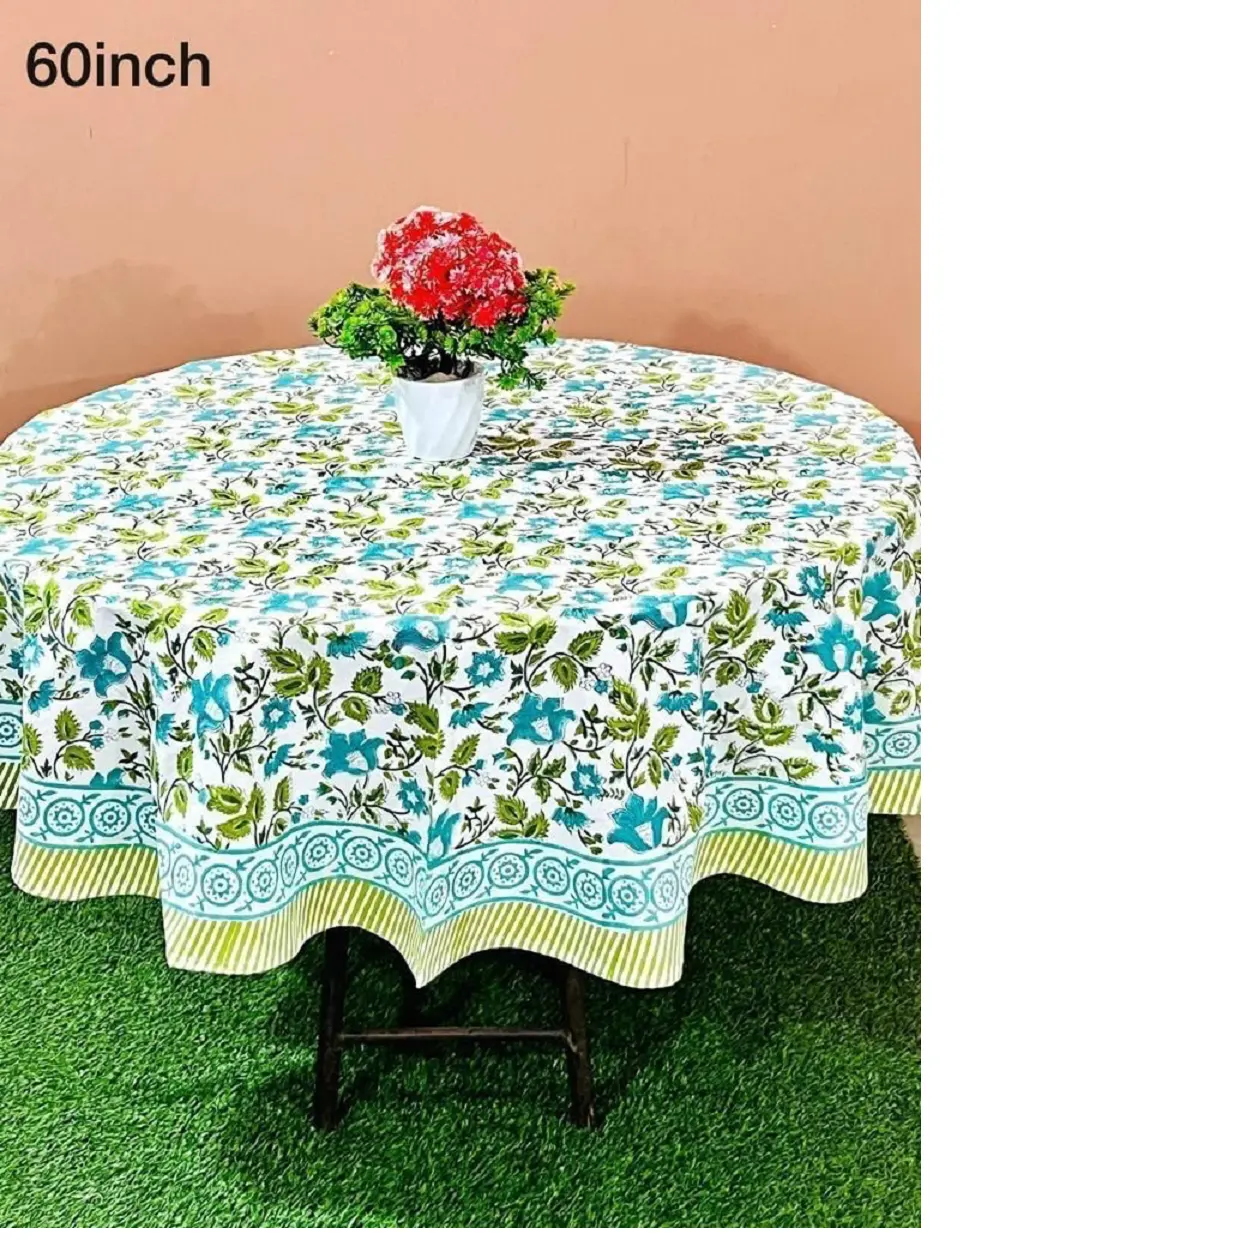 custom made cotton printed table cloths available in 60 inch Diameter ideal for home furnishing stores and suitable for resale